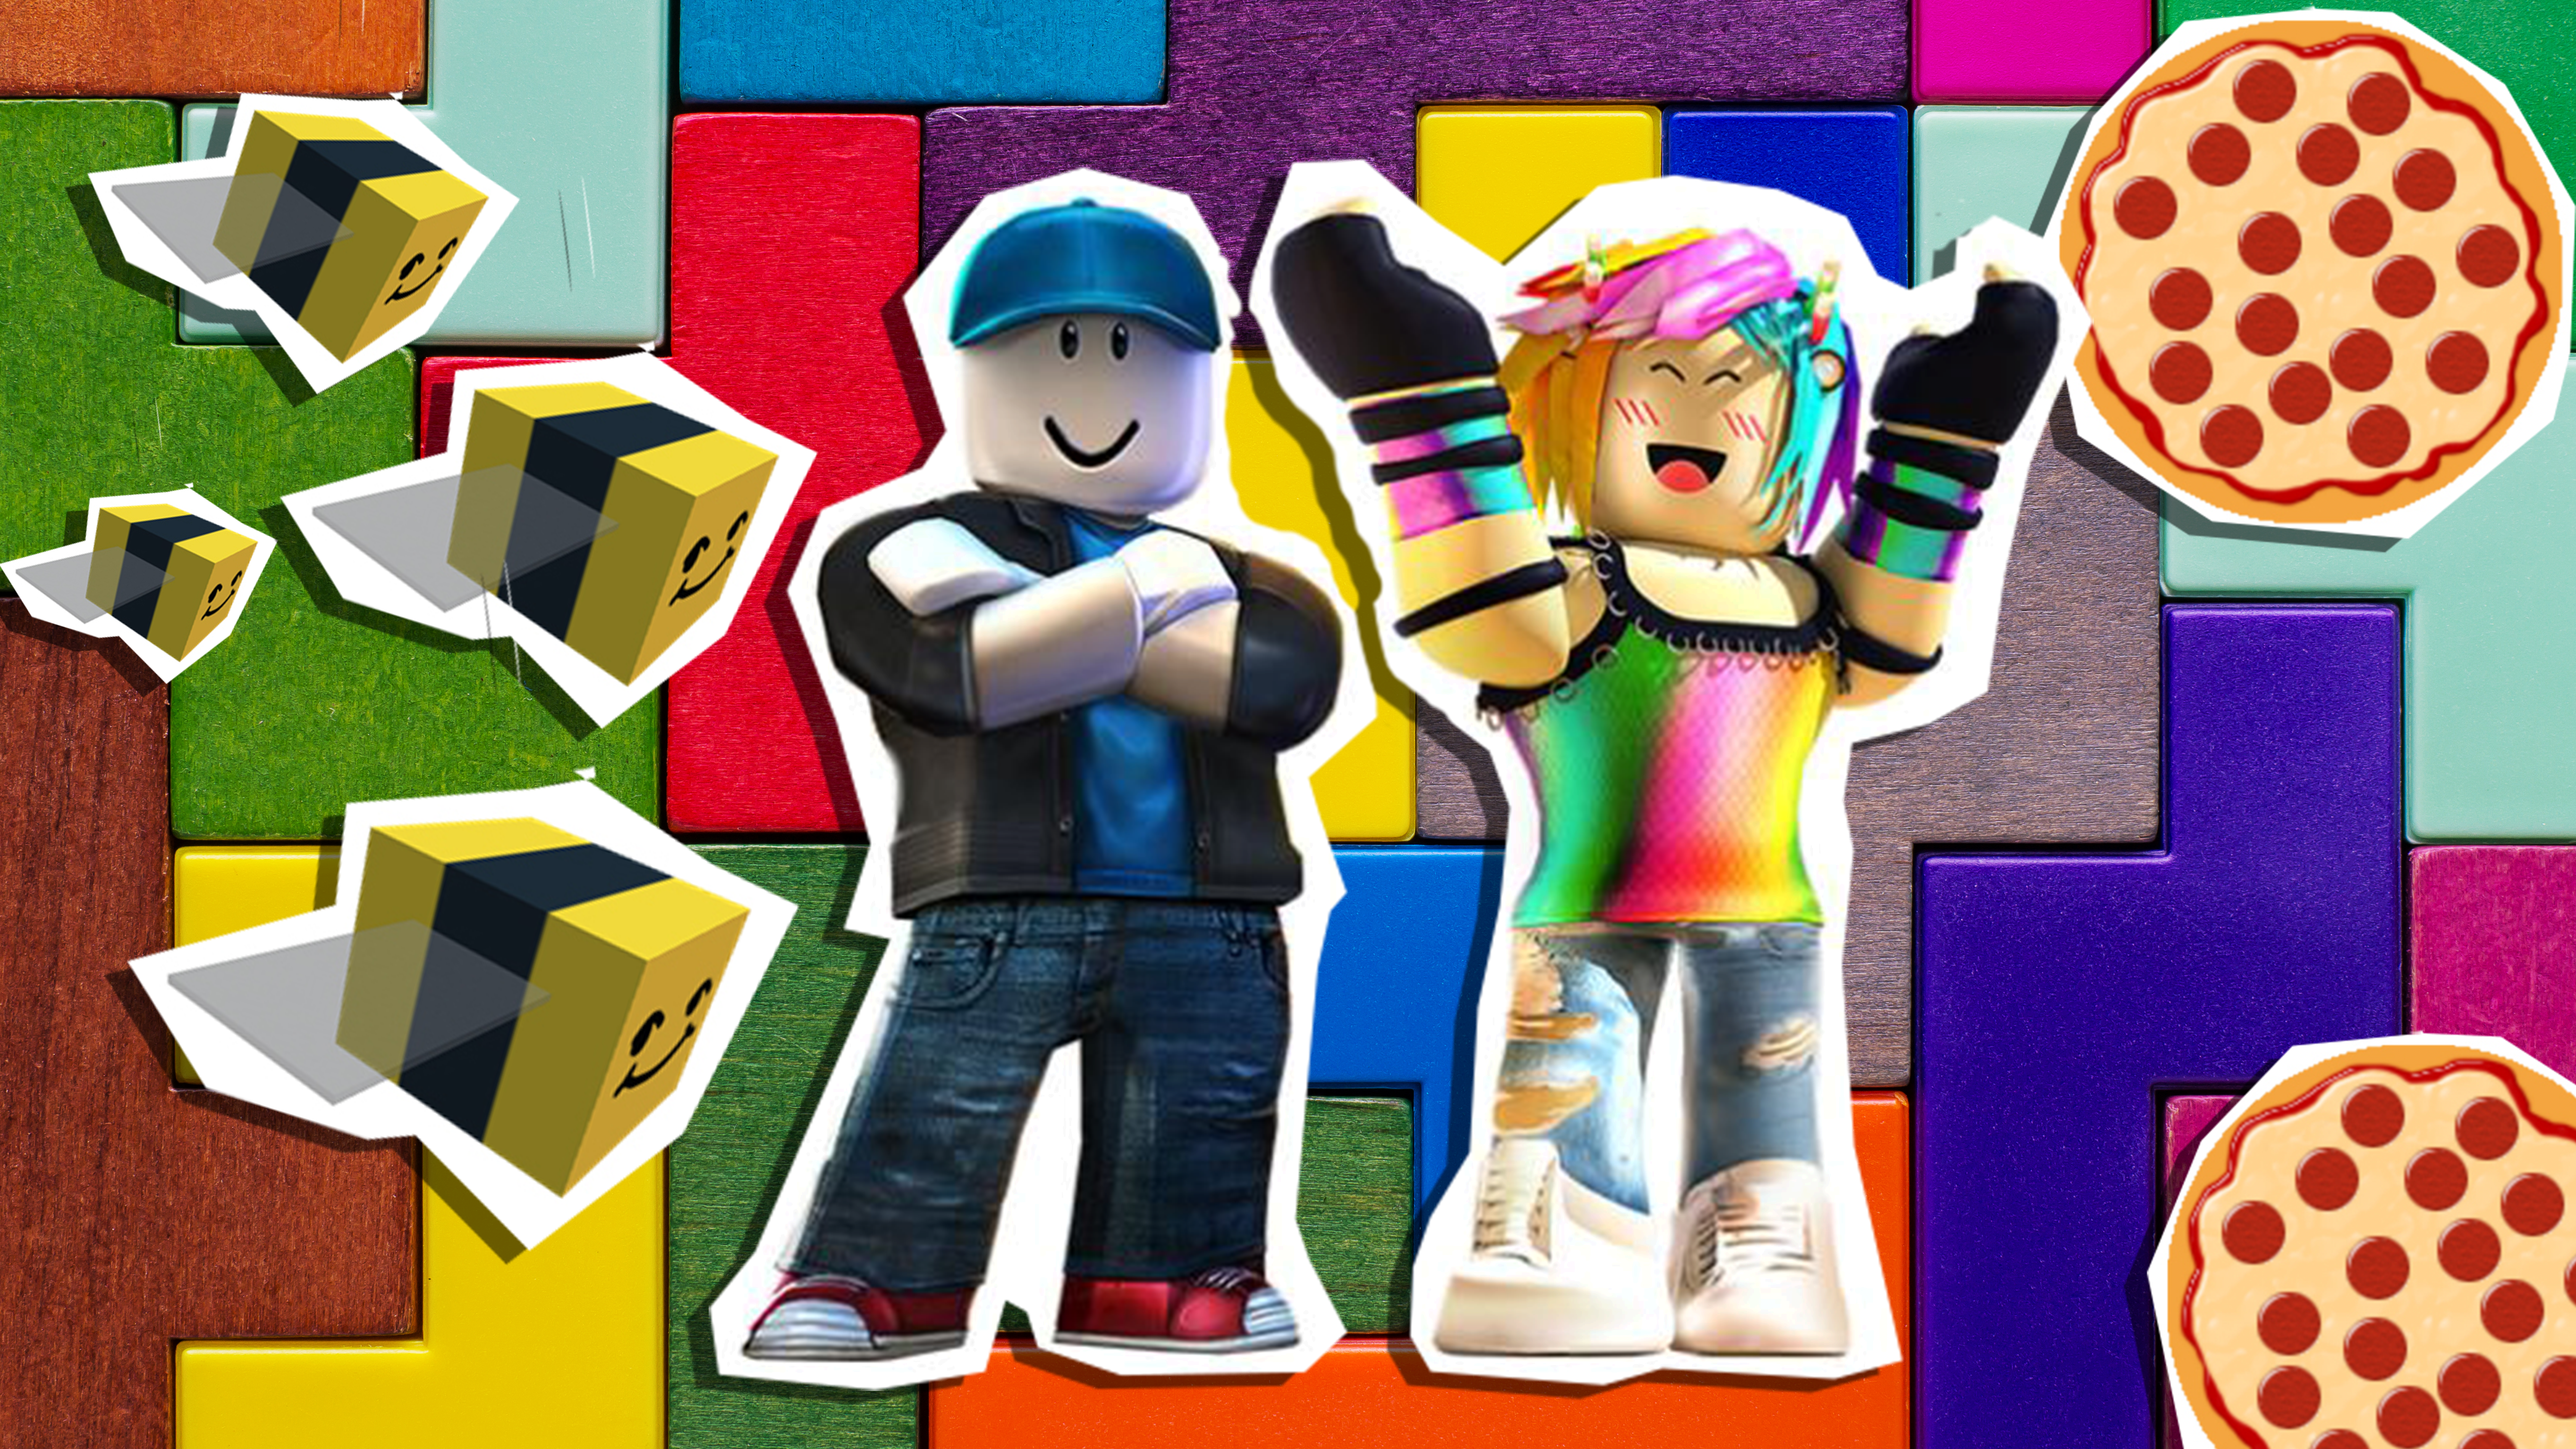 The 10 Best Roblox Games of 2017!  We made a list of the top 10 games to  play on 💥 Roblox 💥 this year! How many have you played? For more